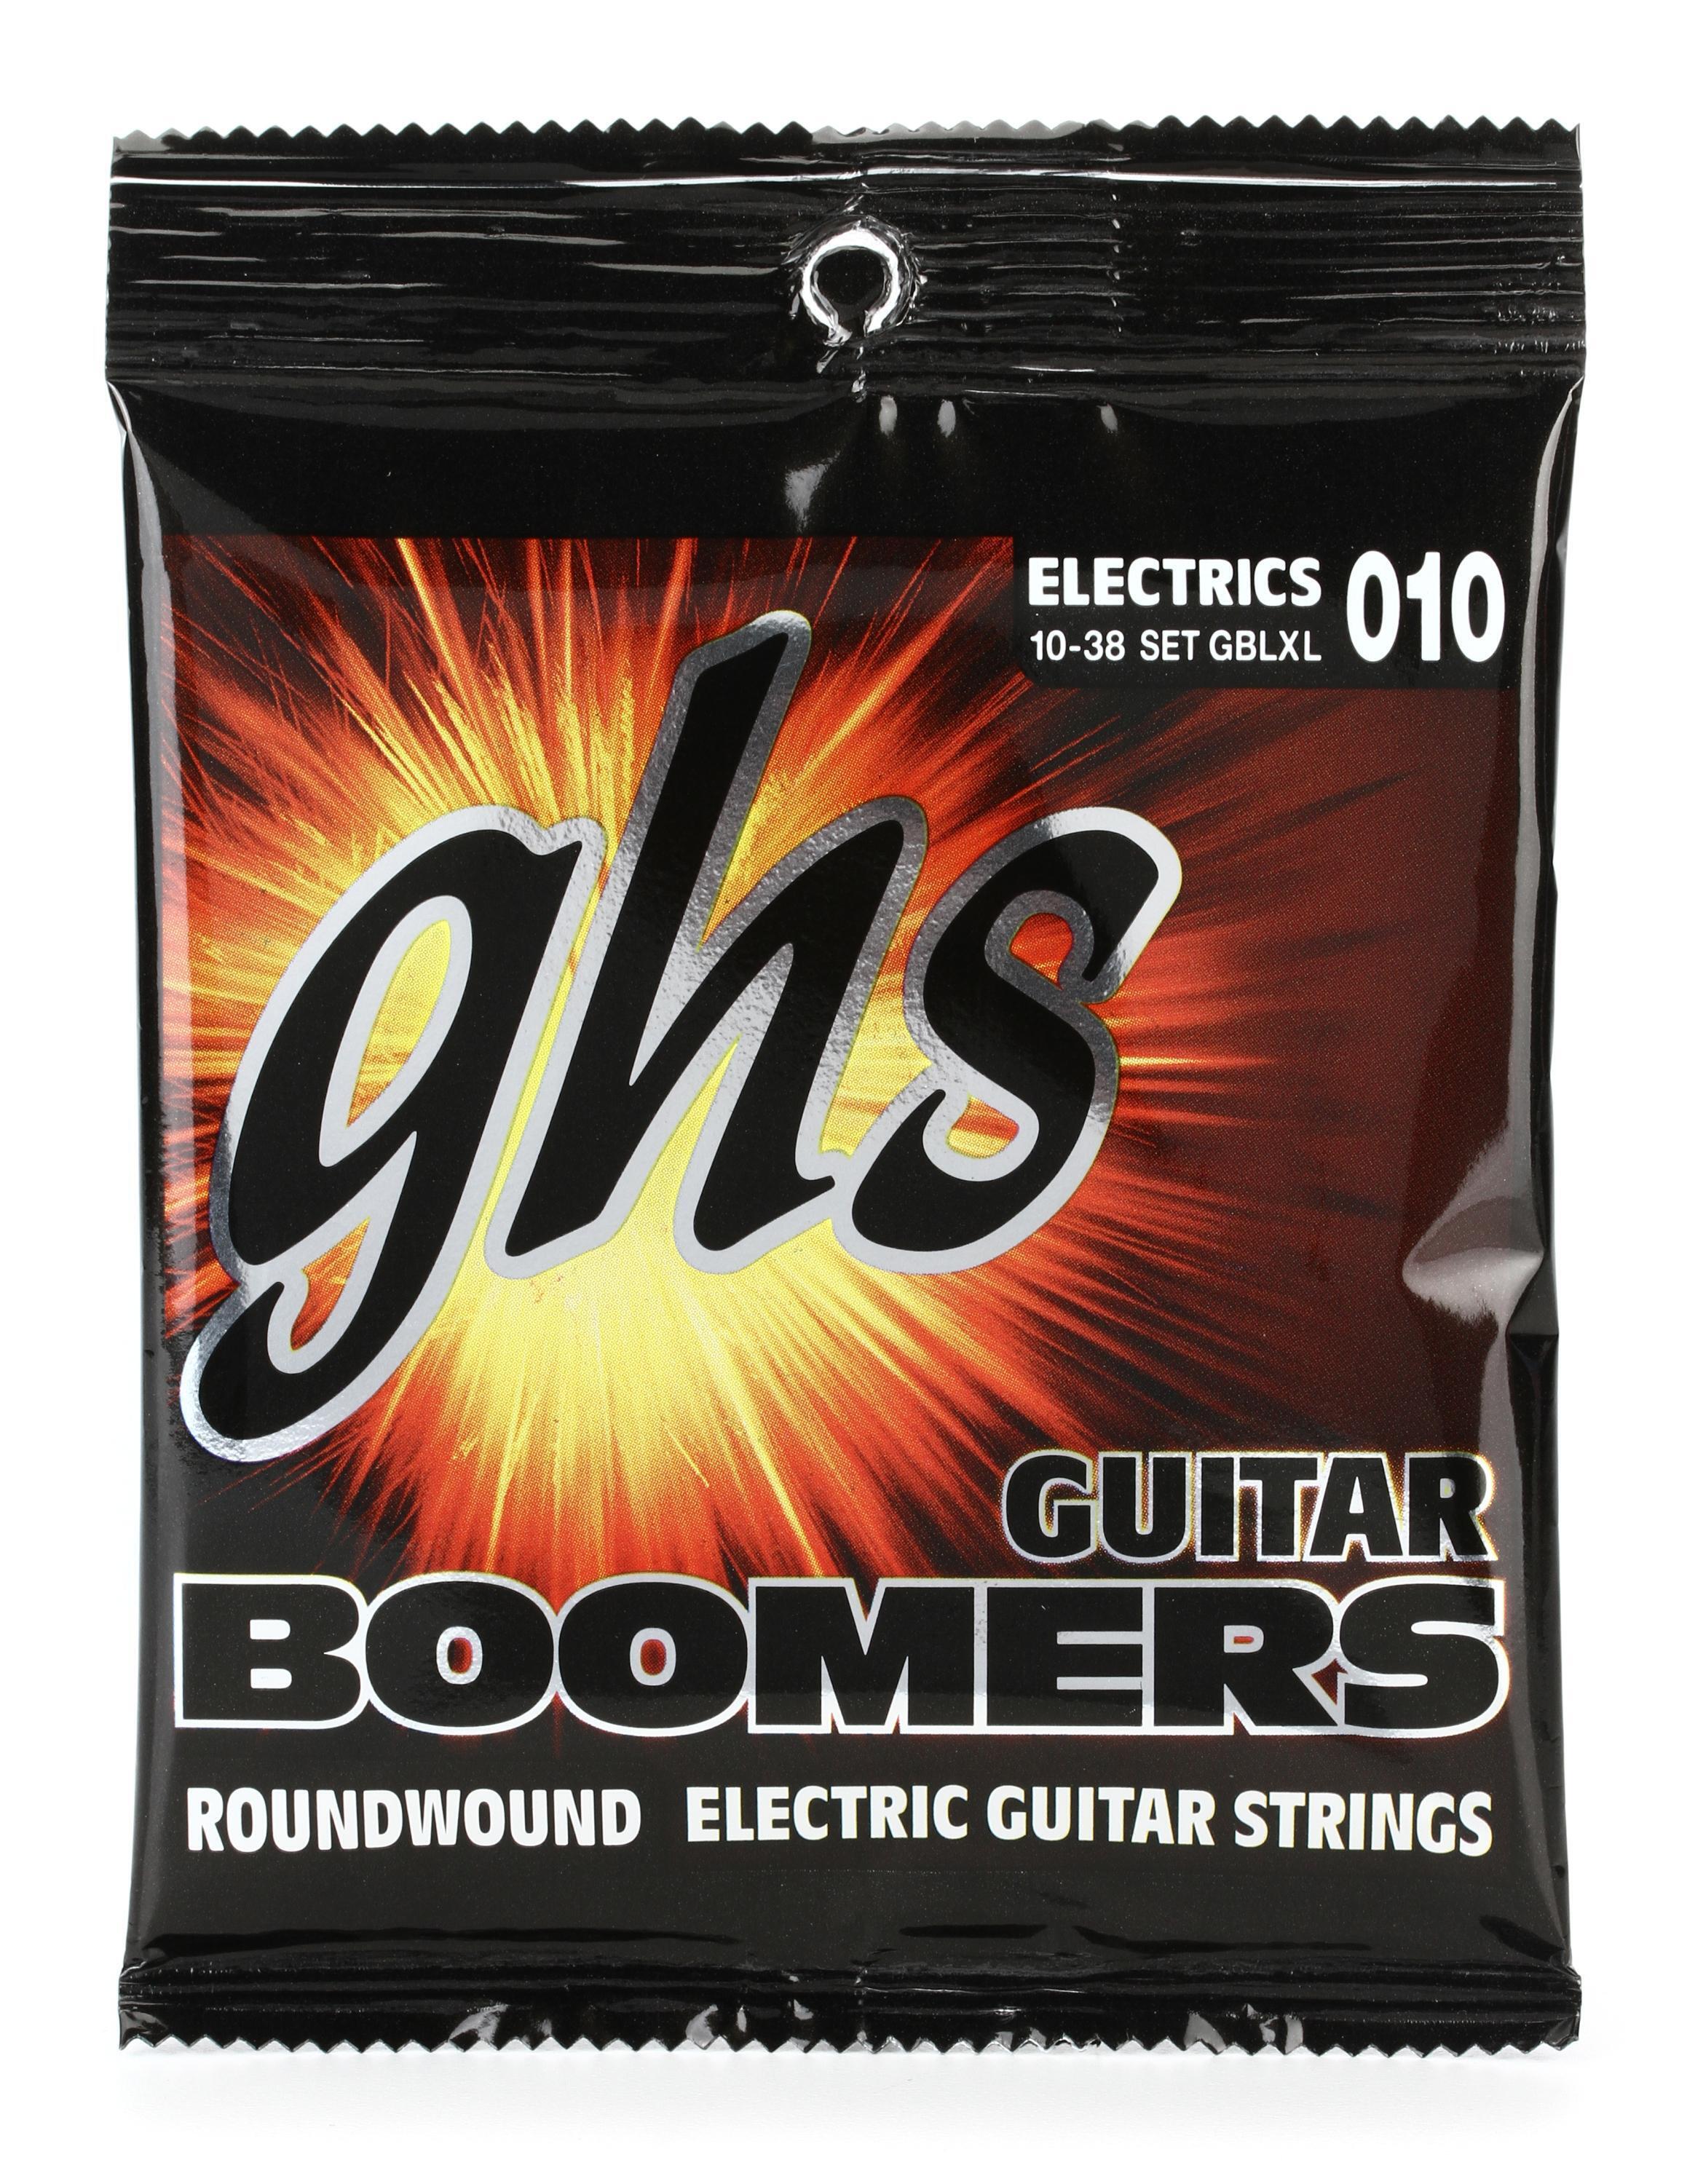 Light　Guitar　Light/Extra　.010-.038　GBLXL　Strings　Electric　Guitar　Boomers　GHS　Sweetwater